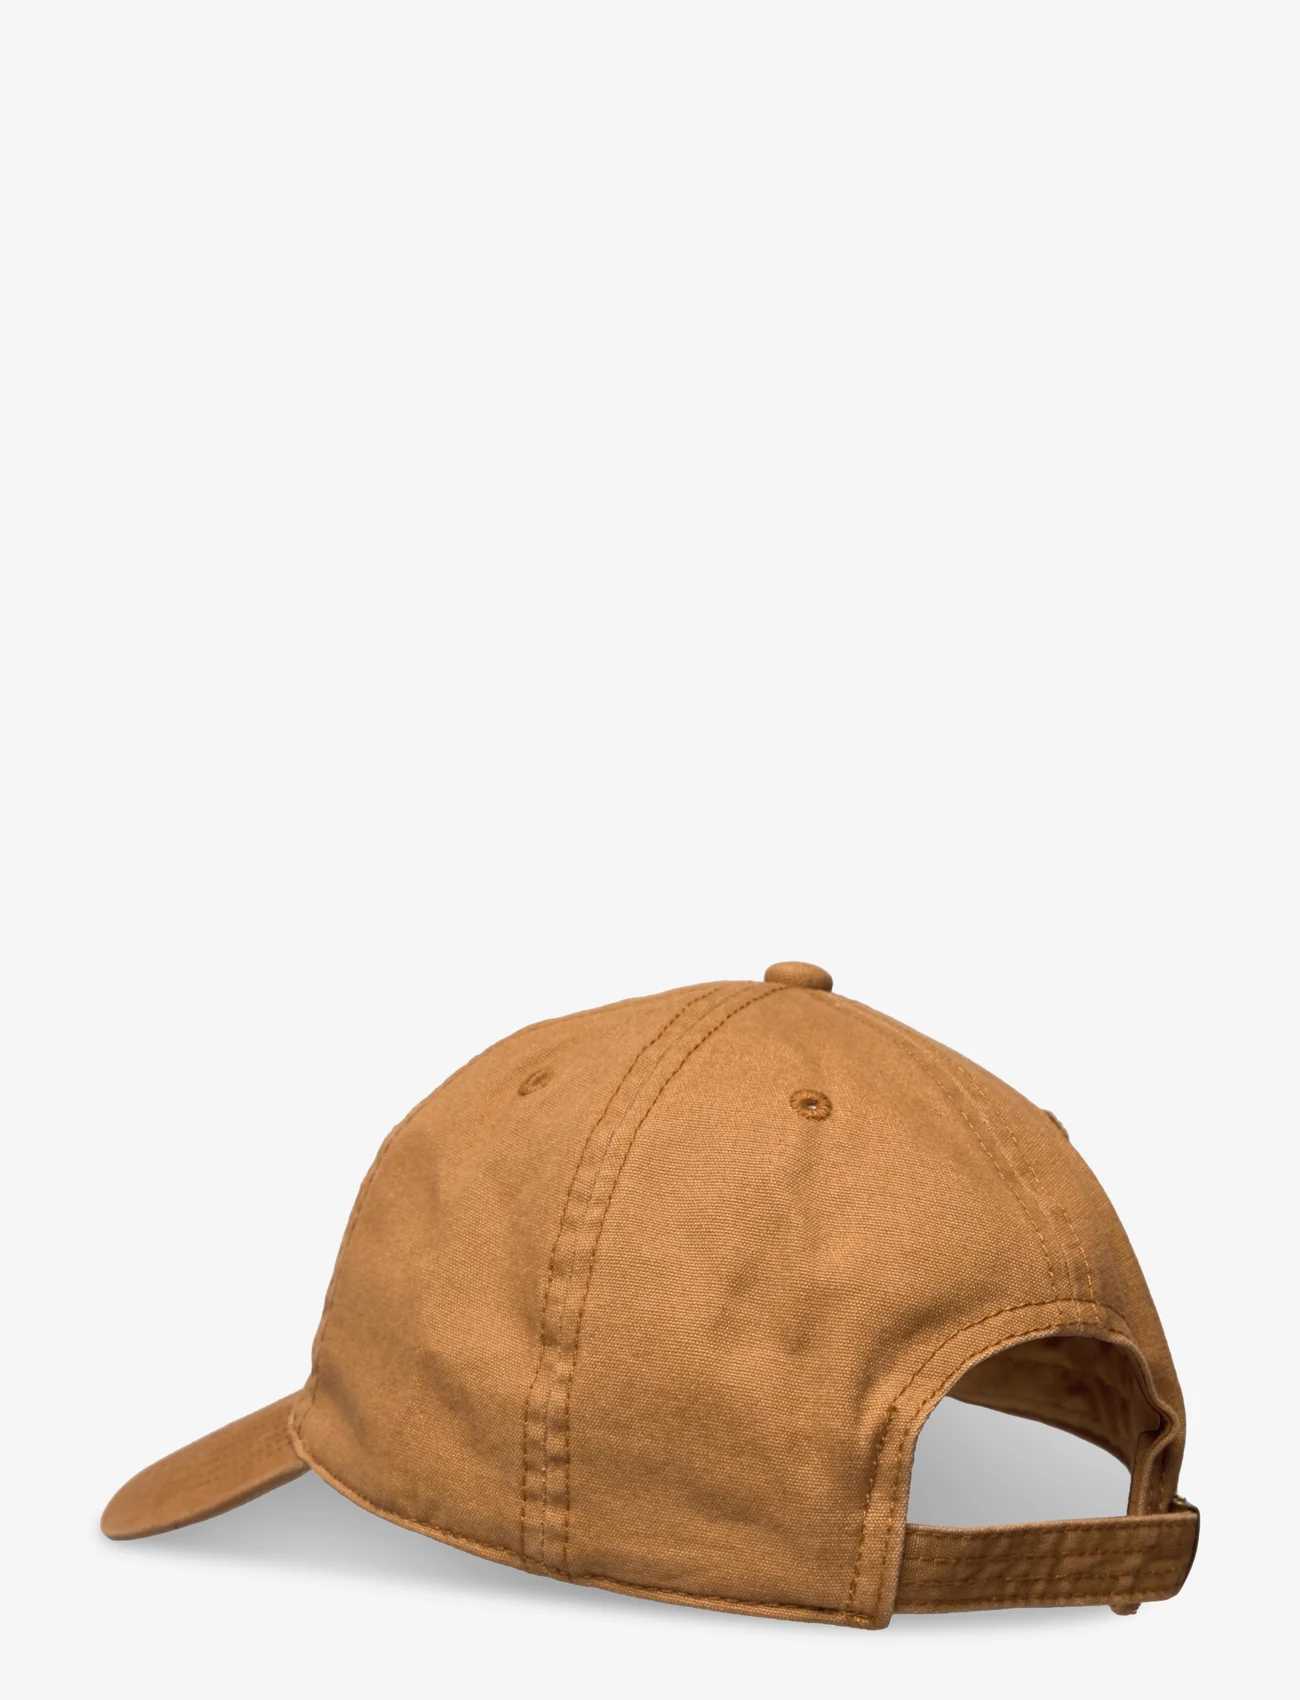 Timberland - SOUNDVIEW Cotton Canvas Baseball Cap WHEAT - lowest prices - wheat - 1